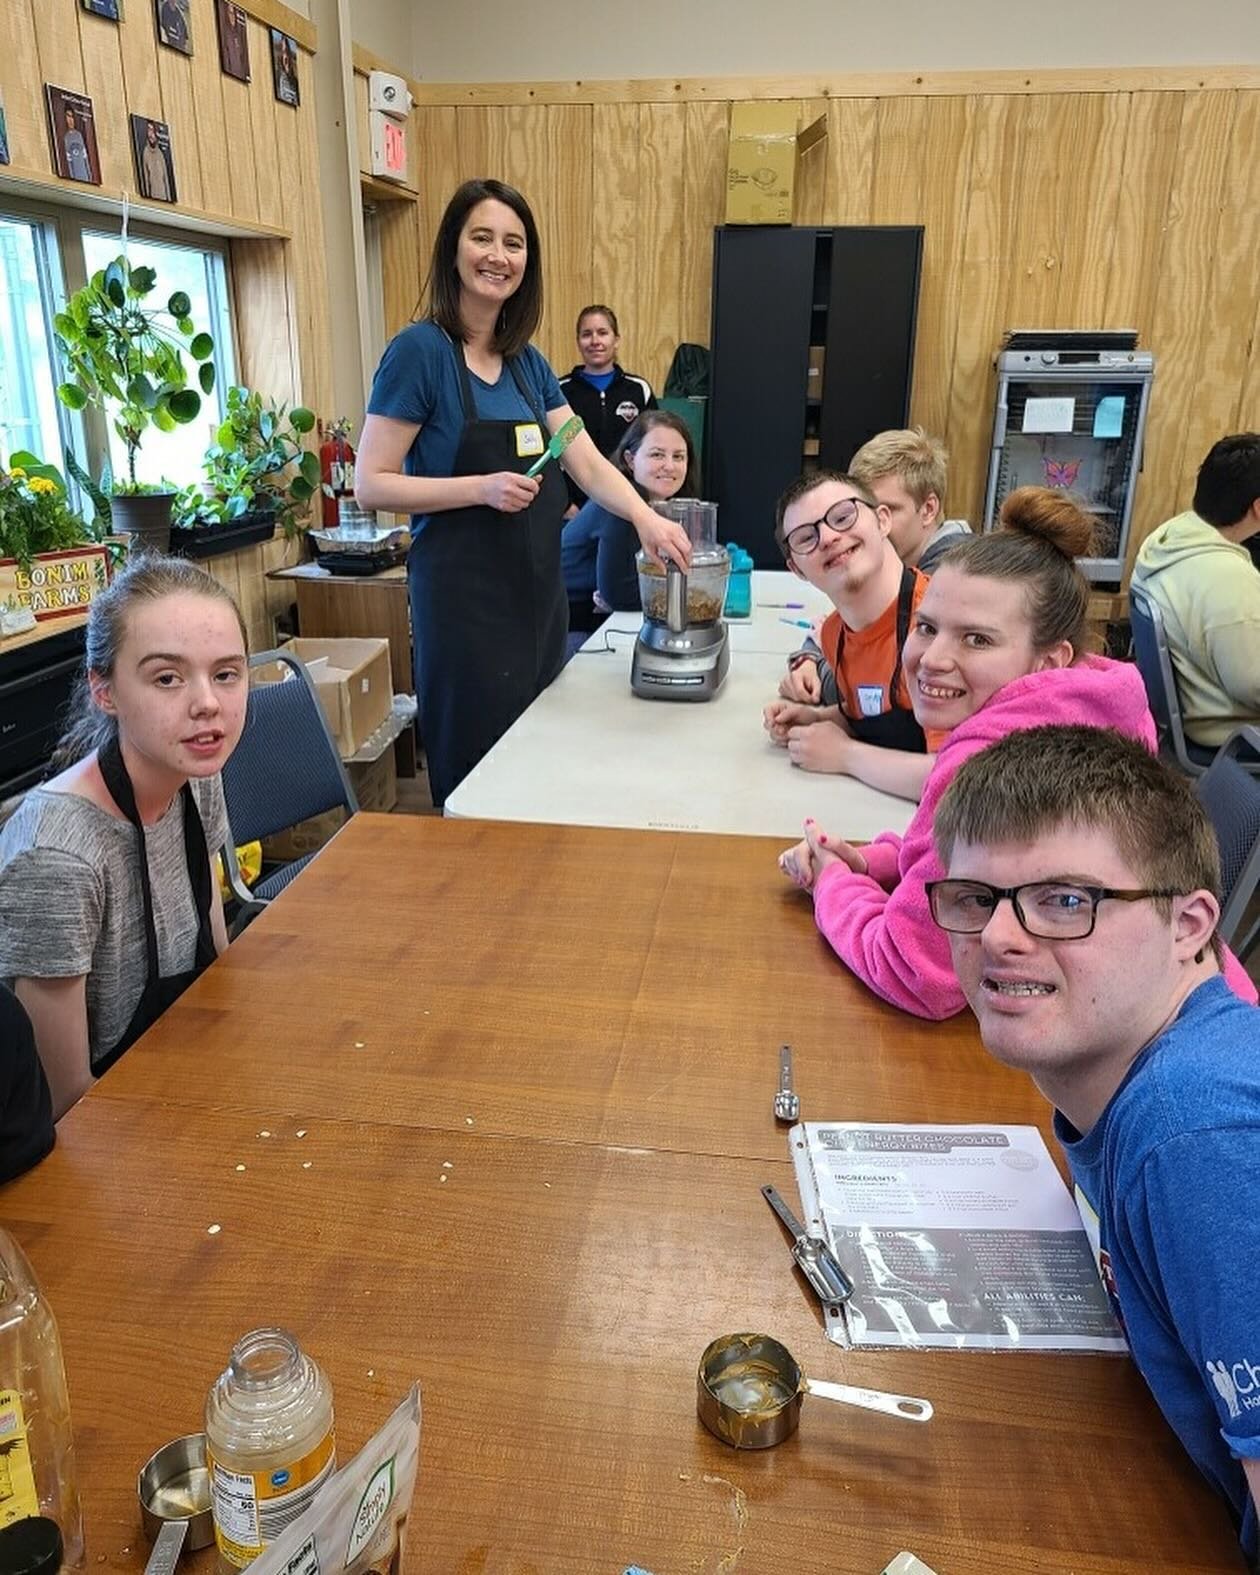 Our last class with the local high school transition programs until school starts again in the fall. We 💓 cooking with these groups and feel really grateful to have made these connections this school year. 

Thank you to @jccrainbow and @melschariti